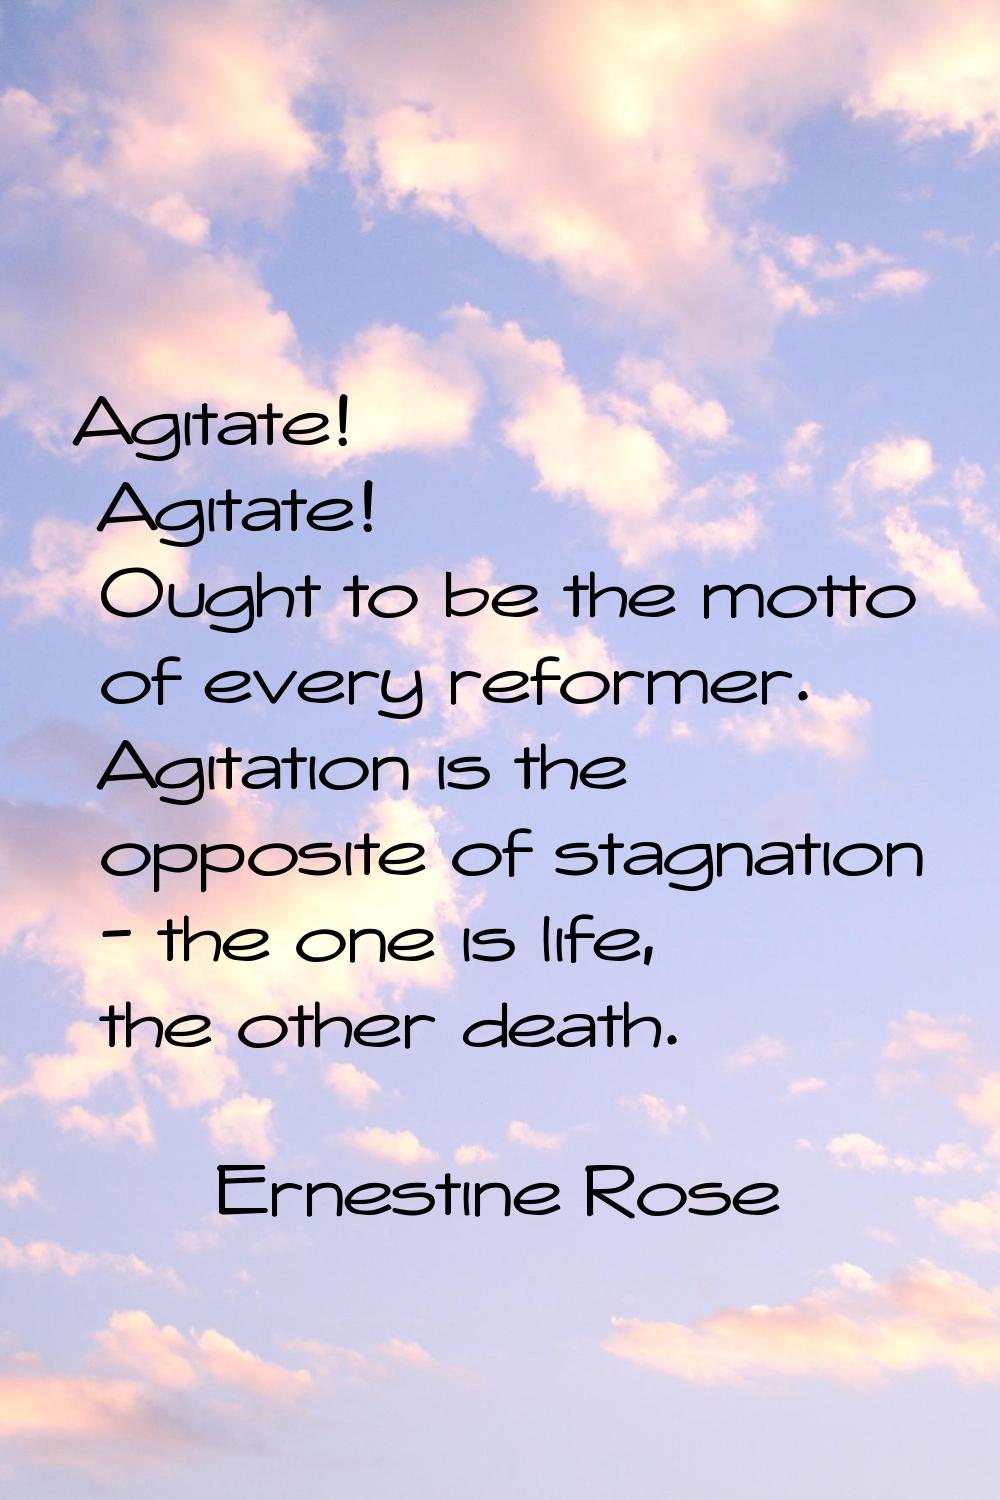 Agitate! Agitate! Ought to be the motto of every reformer. Agitation is the opposite of stagnation 